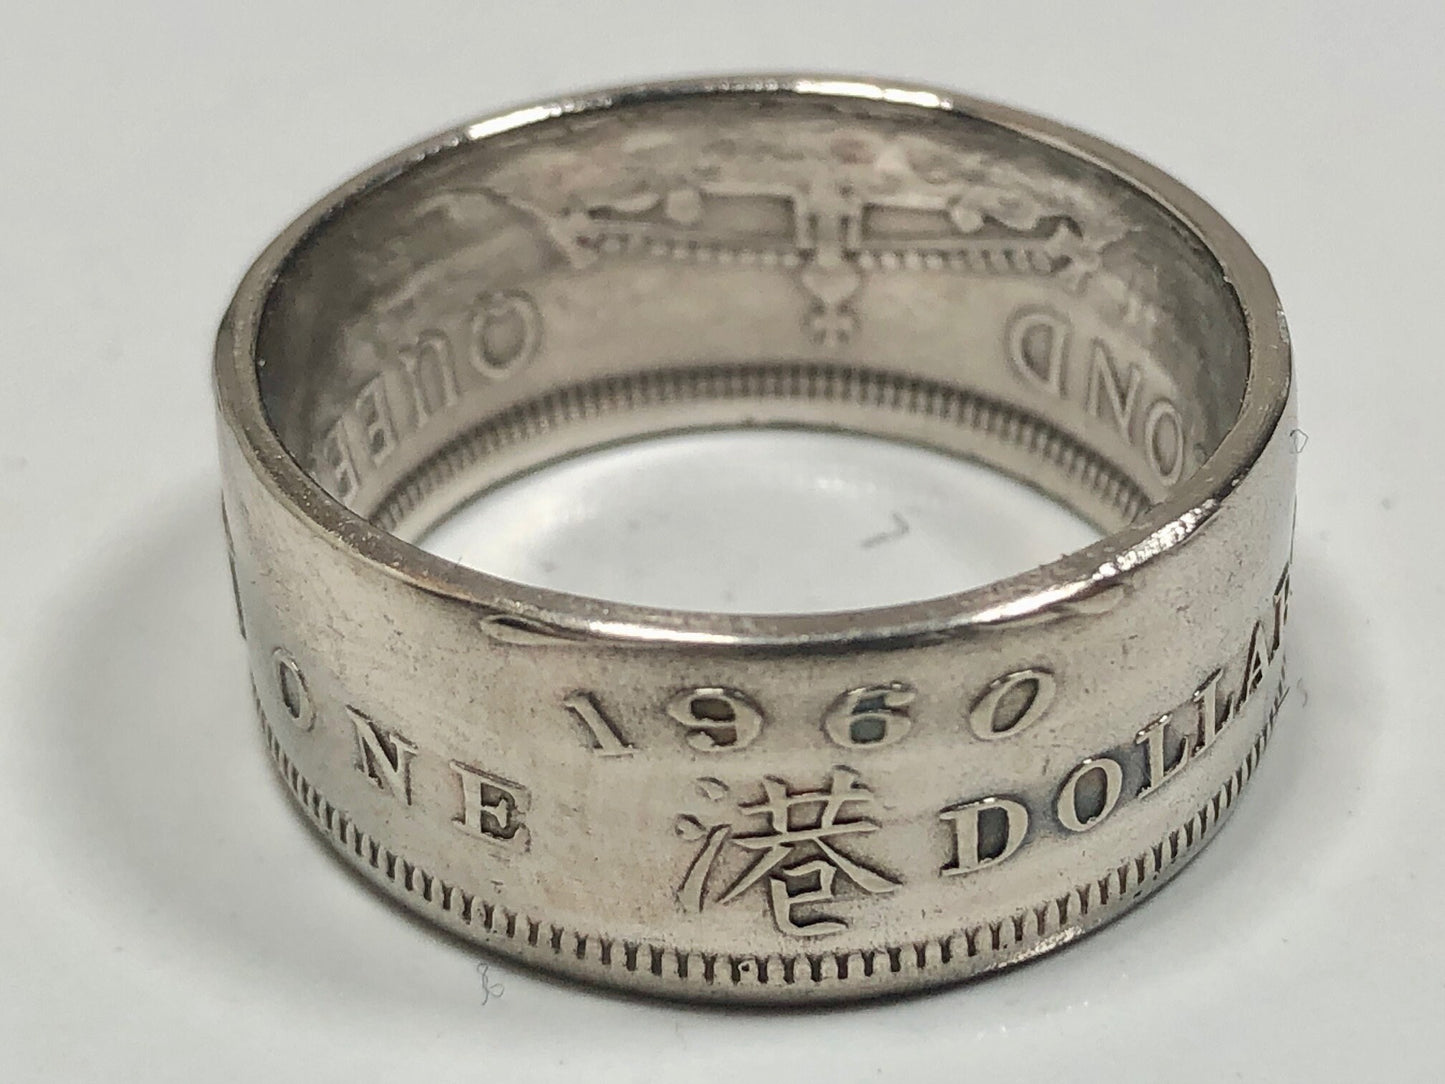 Hong Kong Coin Ring One Dollar China Handmade Personal Jewelry Ring Gift For Friend Coin Ring Gift For Him Her World Coin Collector